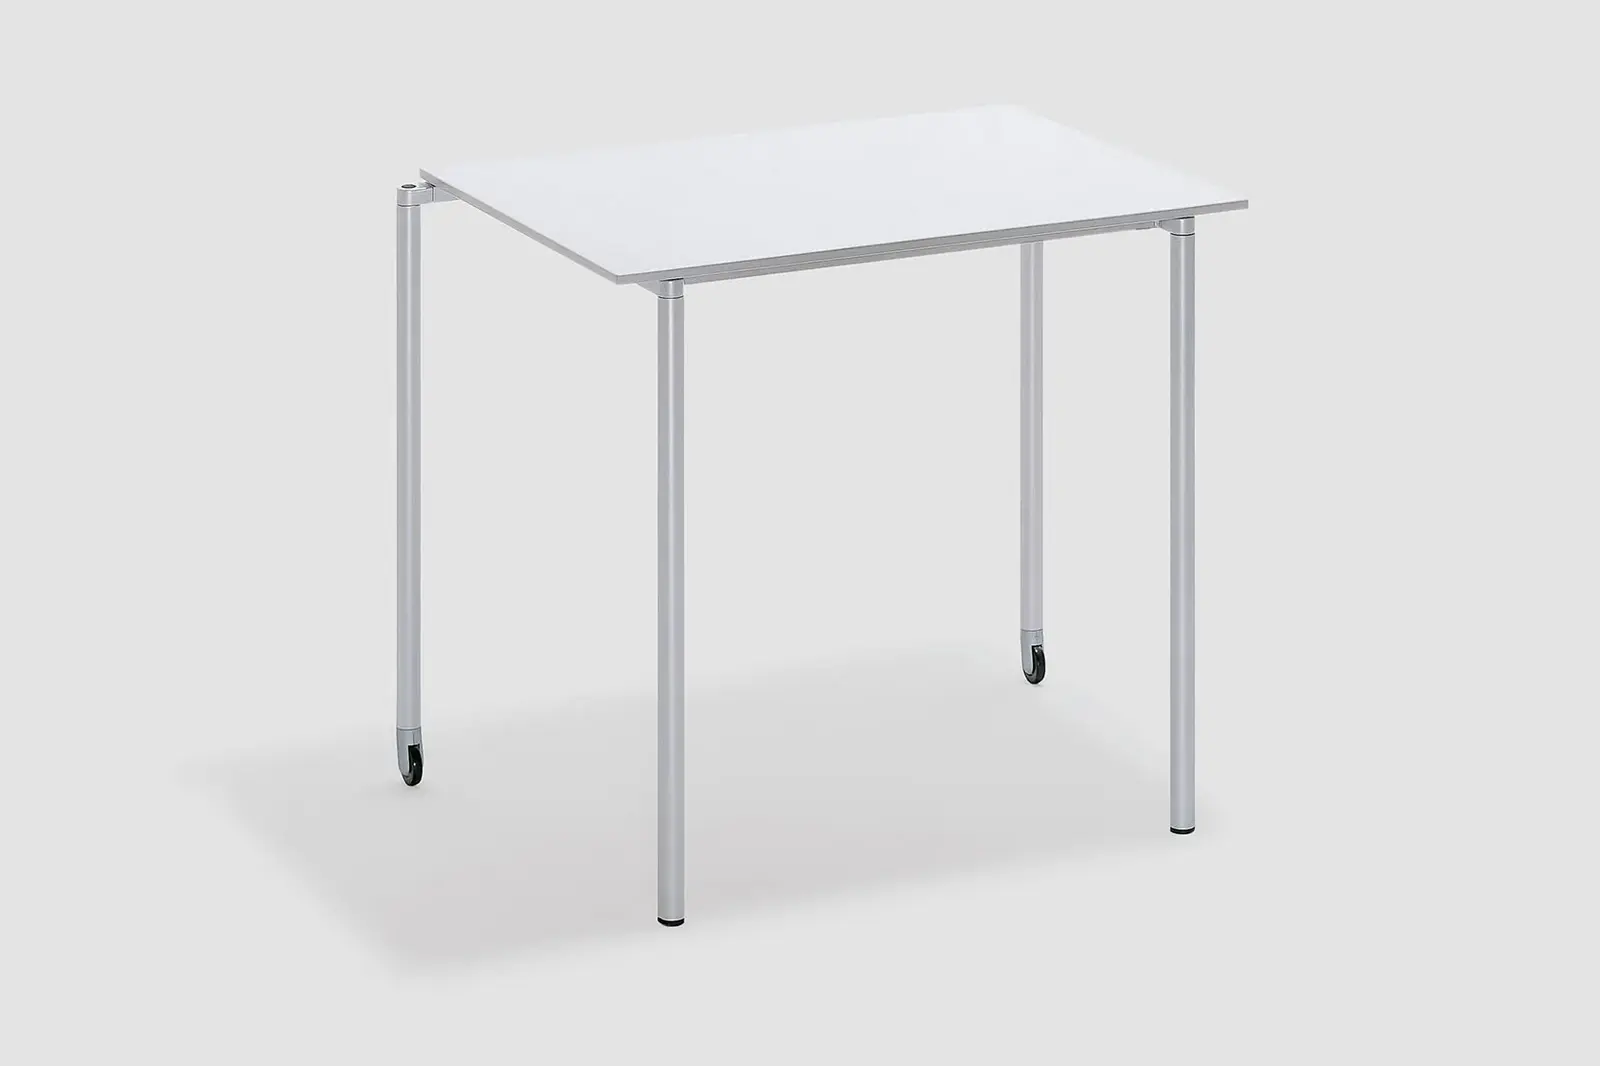 mobile-com-table, Meeting table, Bene Office furniture, Image 1